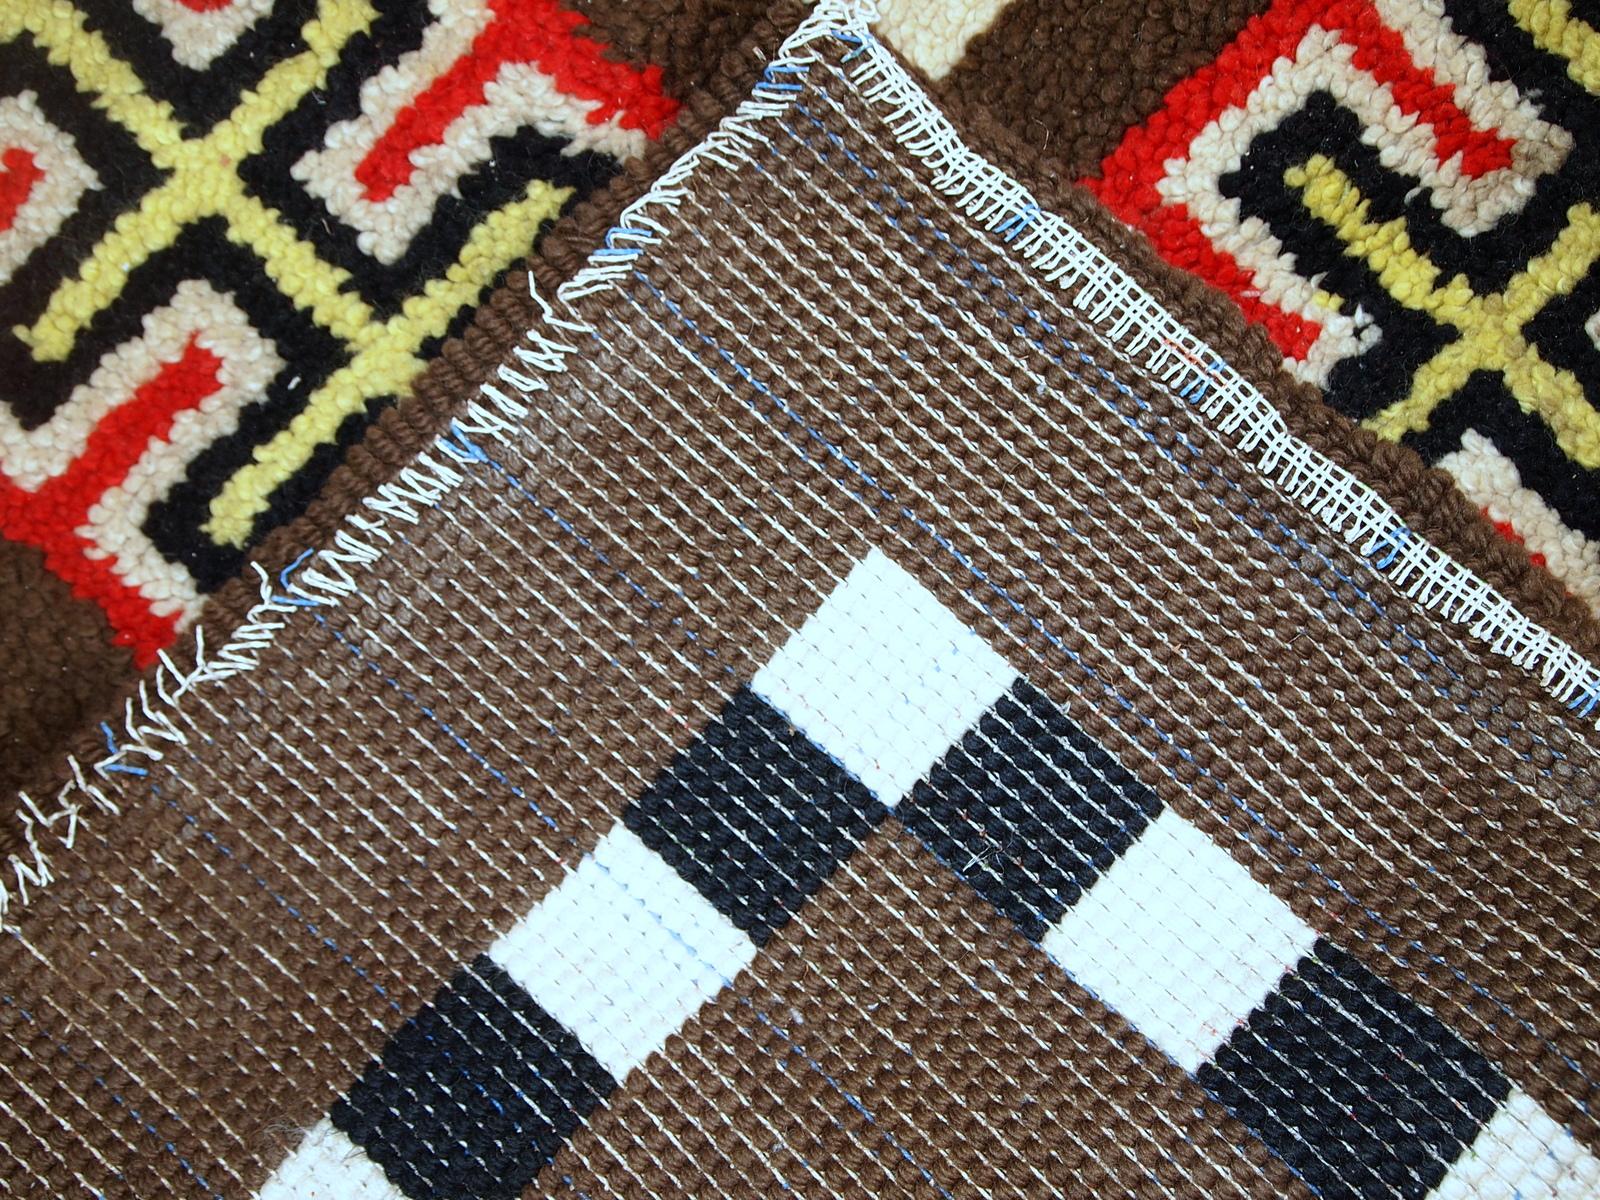 Handmade vintage French modern rug in original good condition. The rug is from the middle of the 20th century made in wool.

- Condition: original good,

- circa 1960s,

- Size: 5.9' x 10.5' (180cm x 322cm),

- Material: wool,

- Country